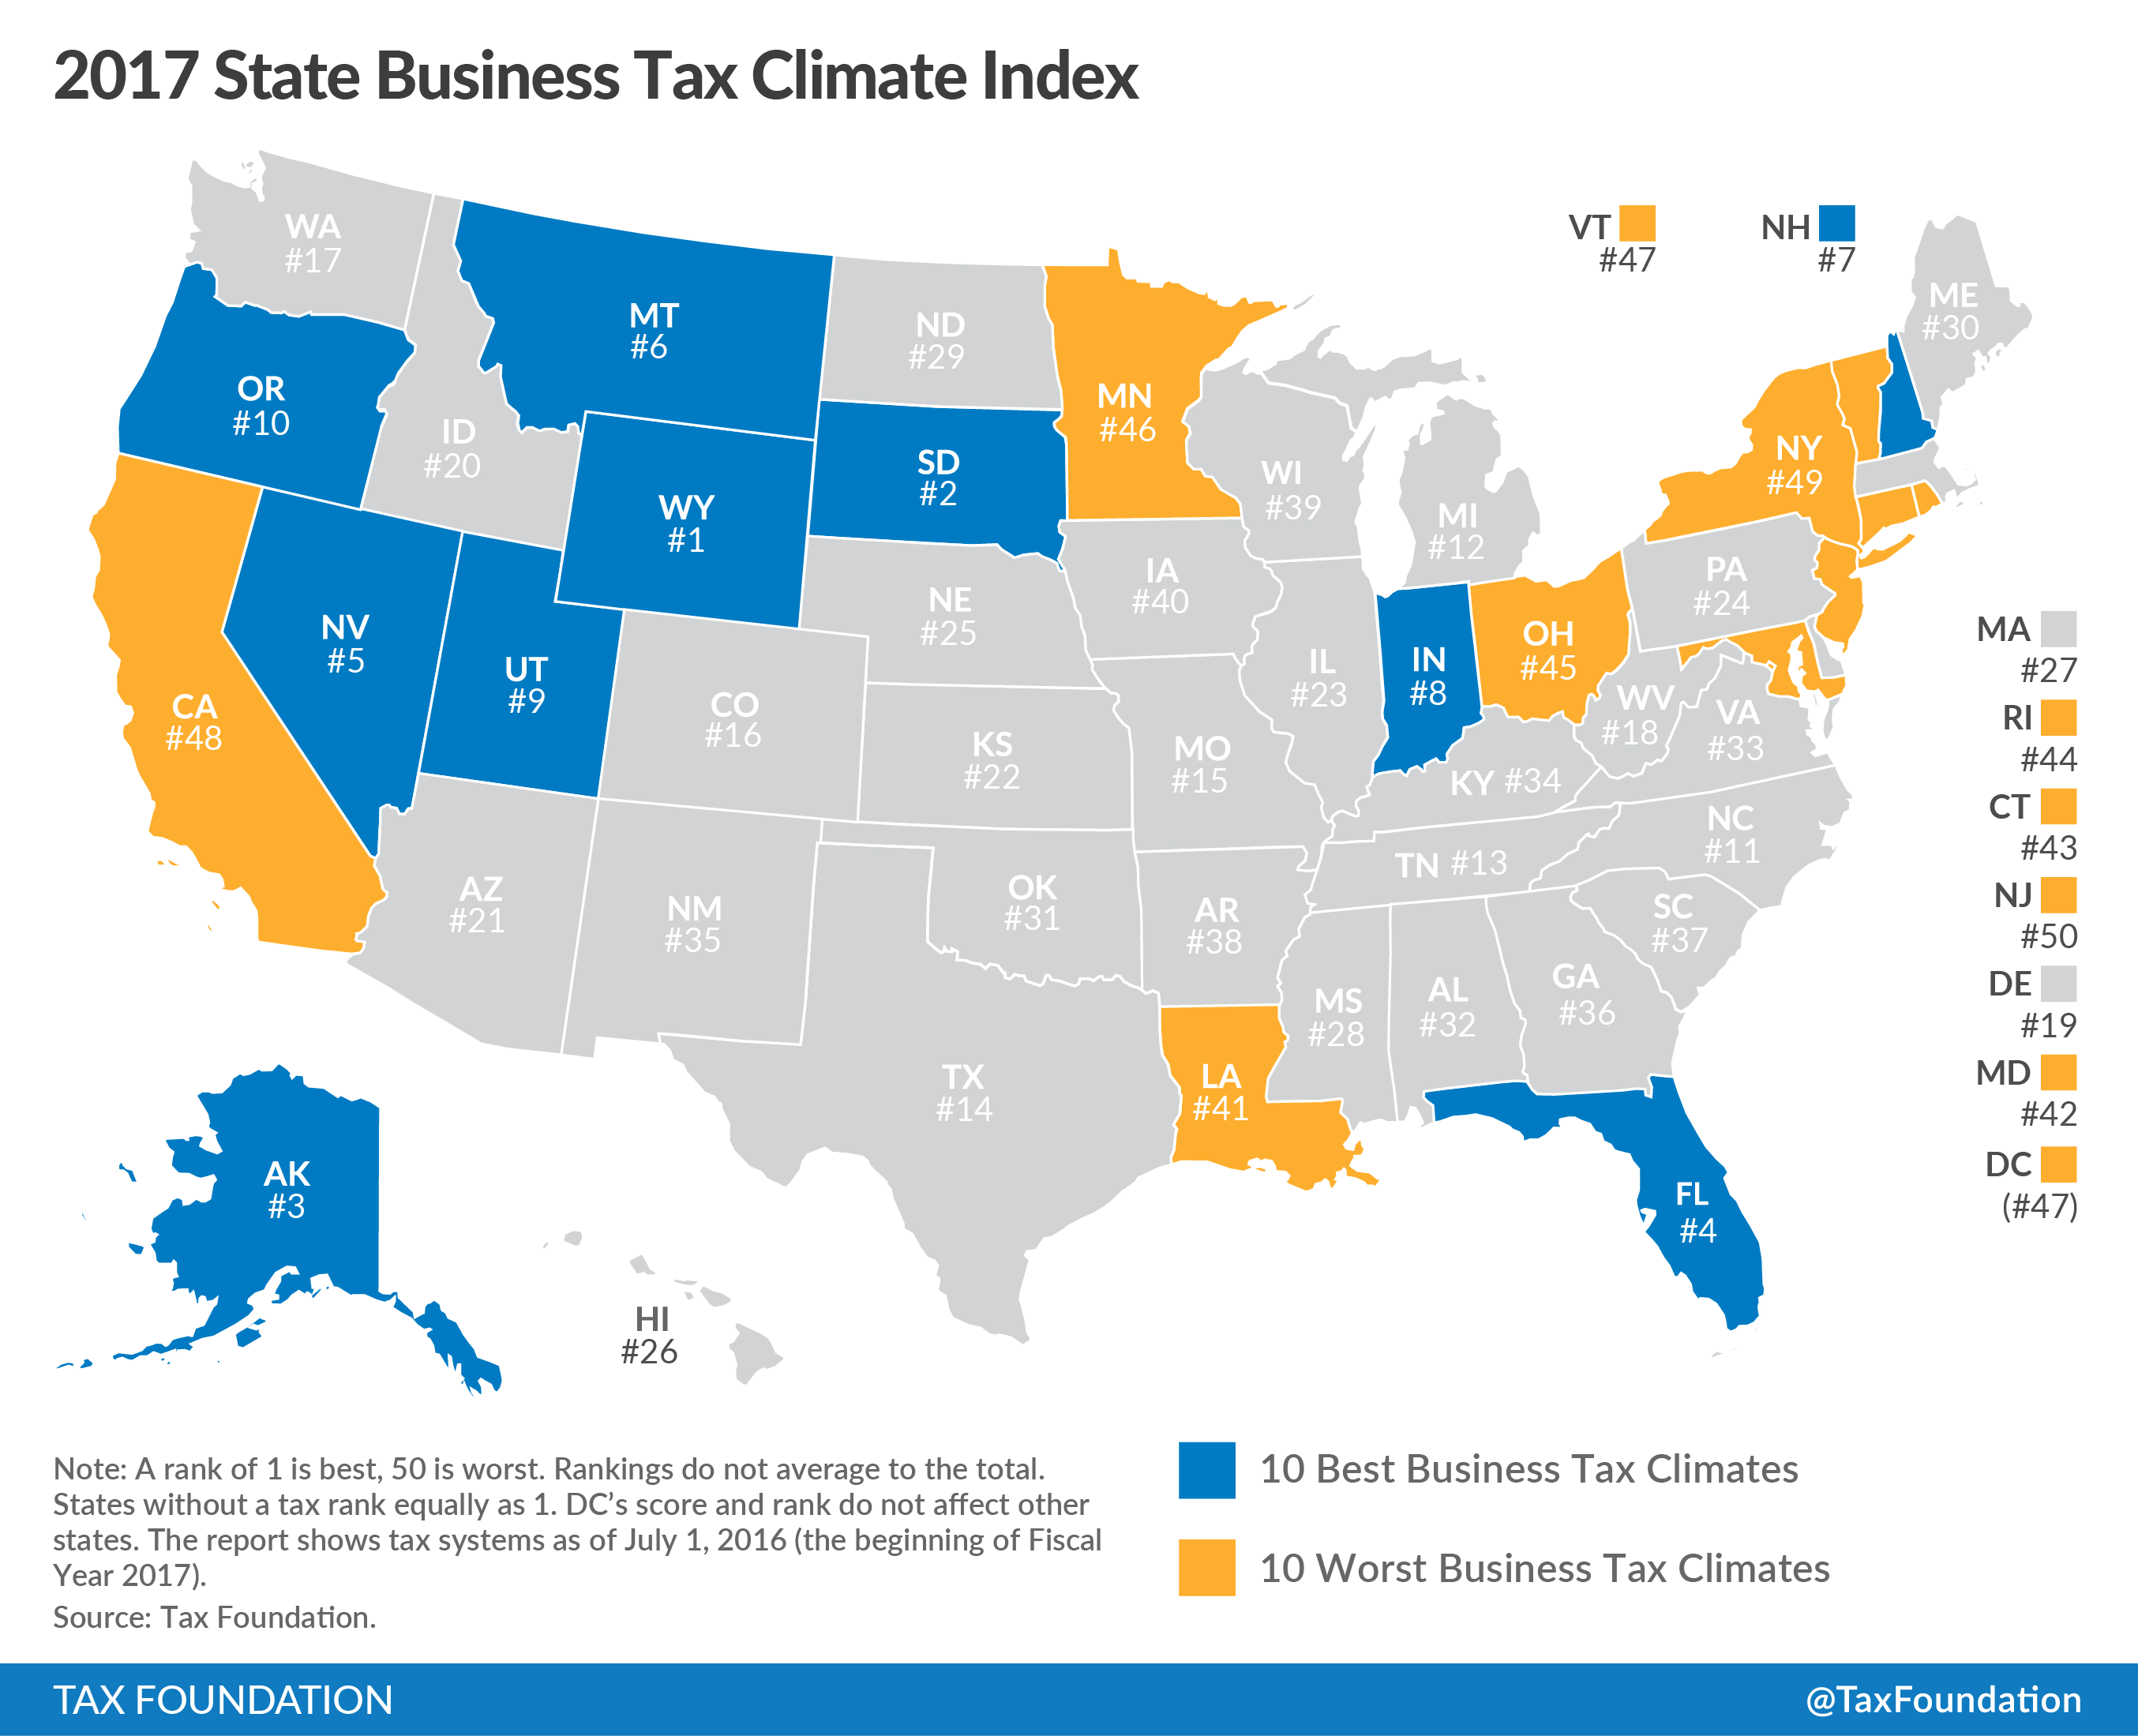 North Carolina business climate ranks higher in national report